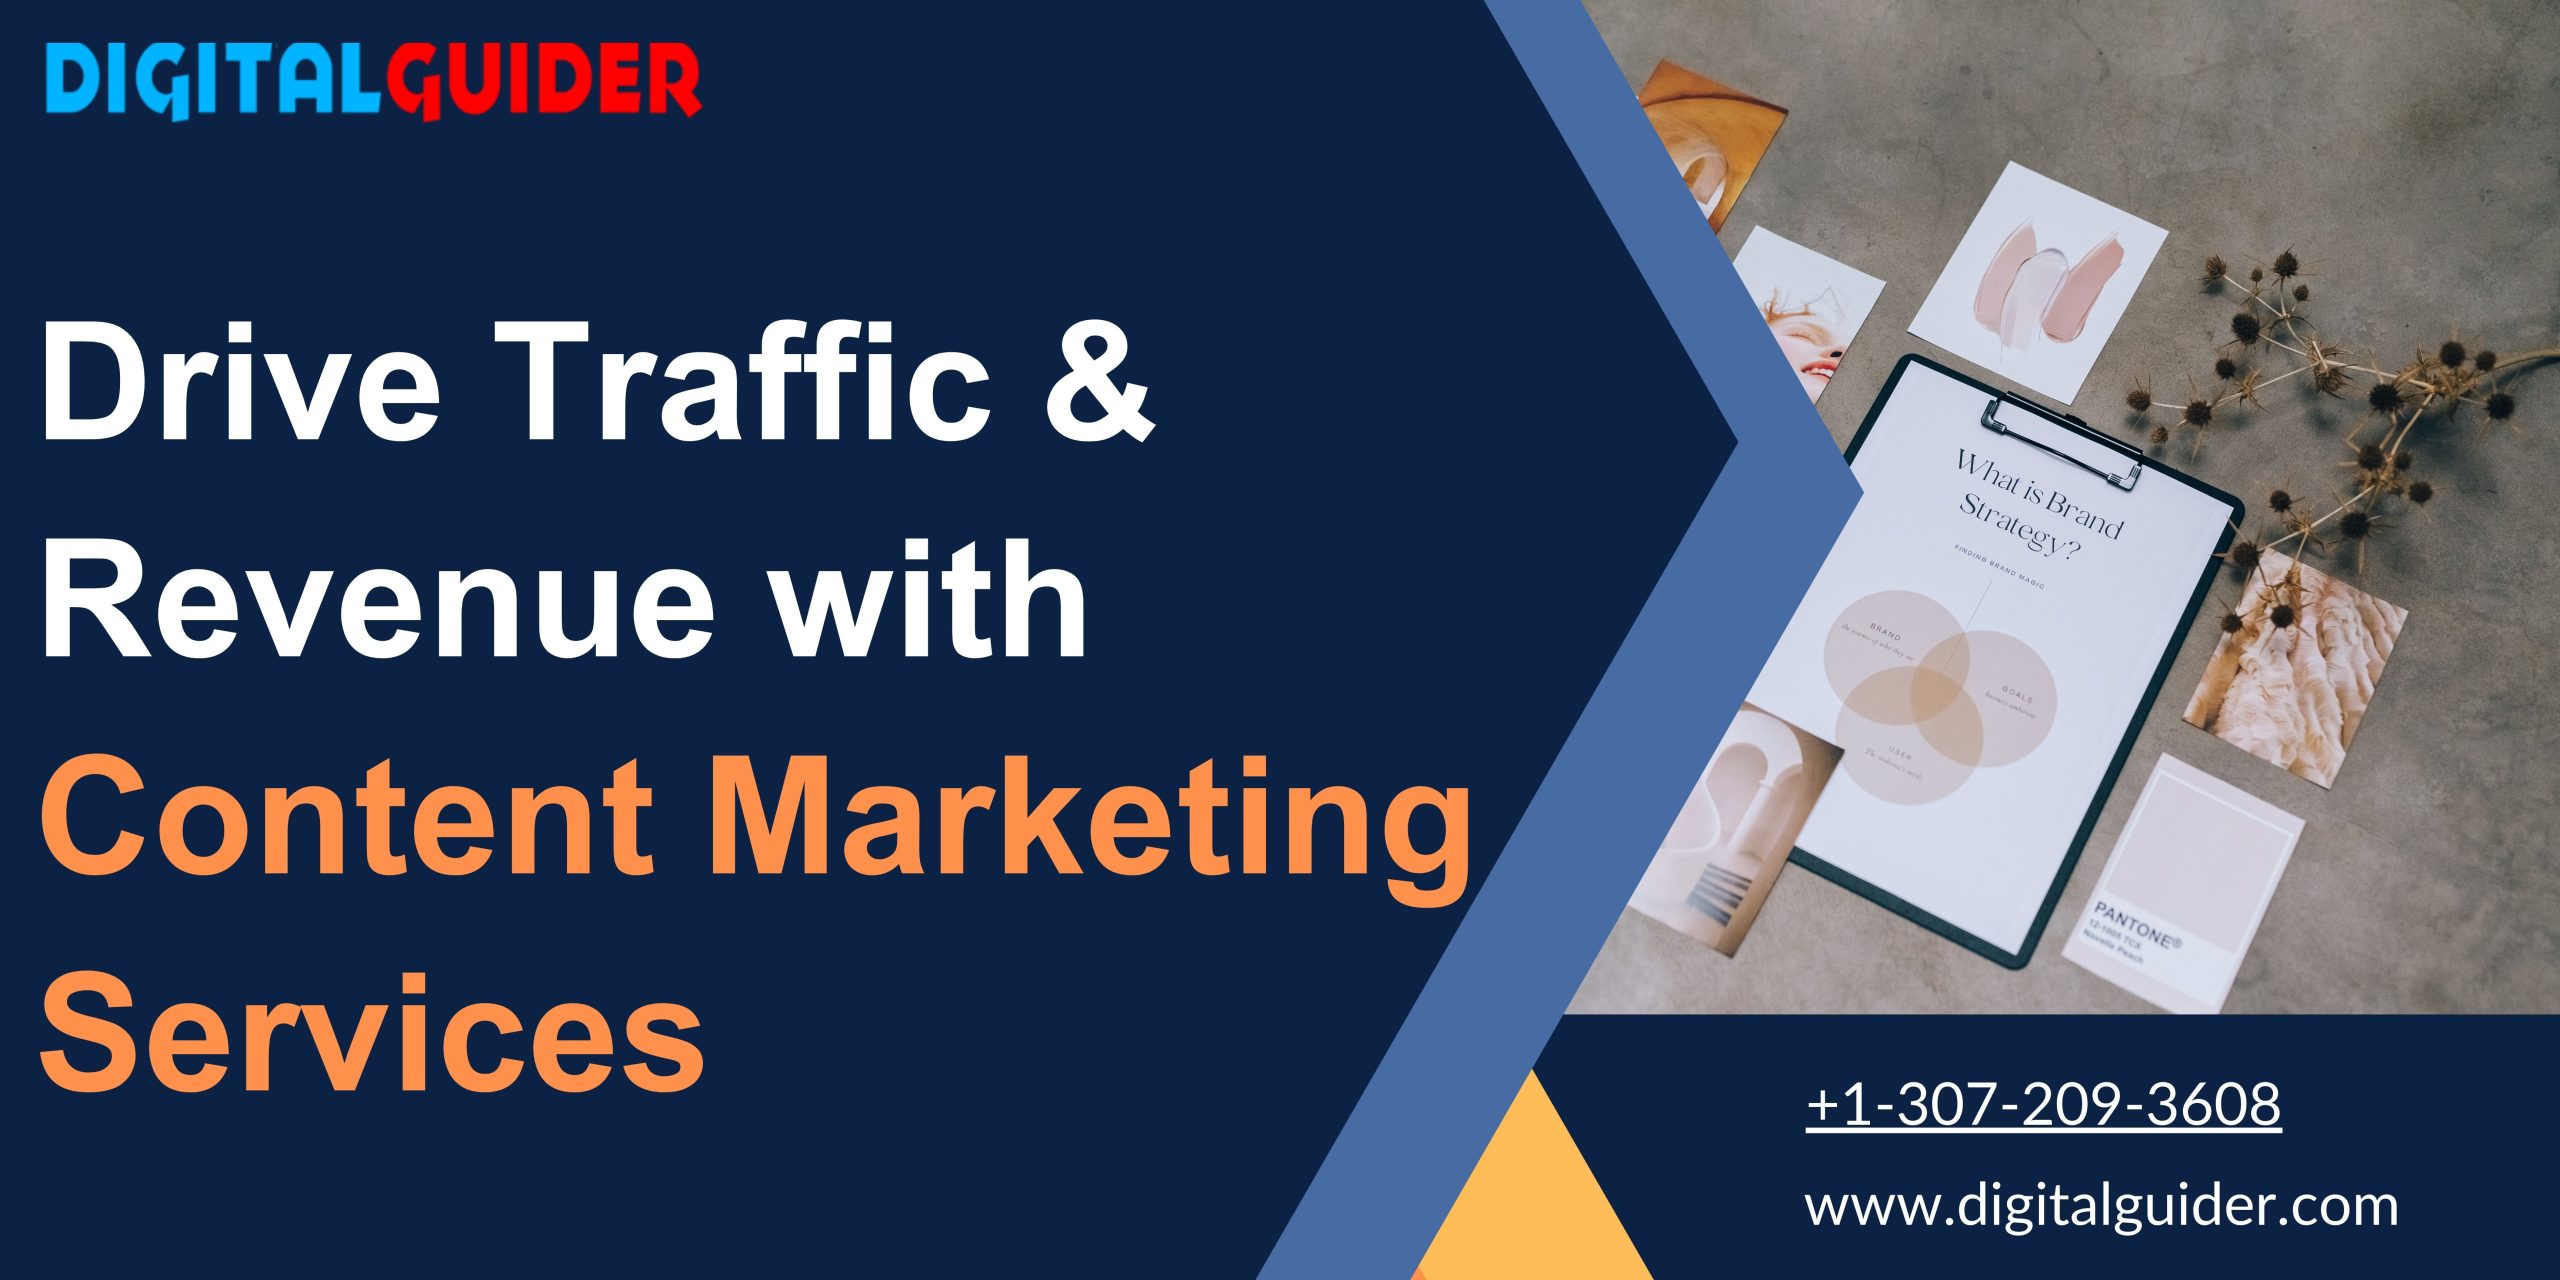 Drive Traffic & Revenue with Content Marketing Services